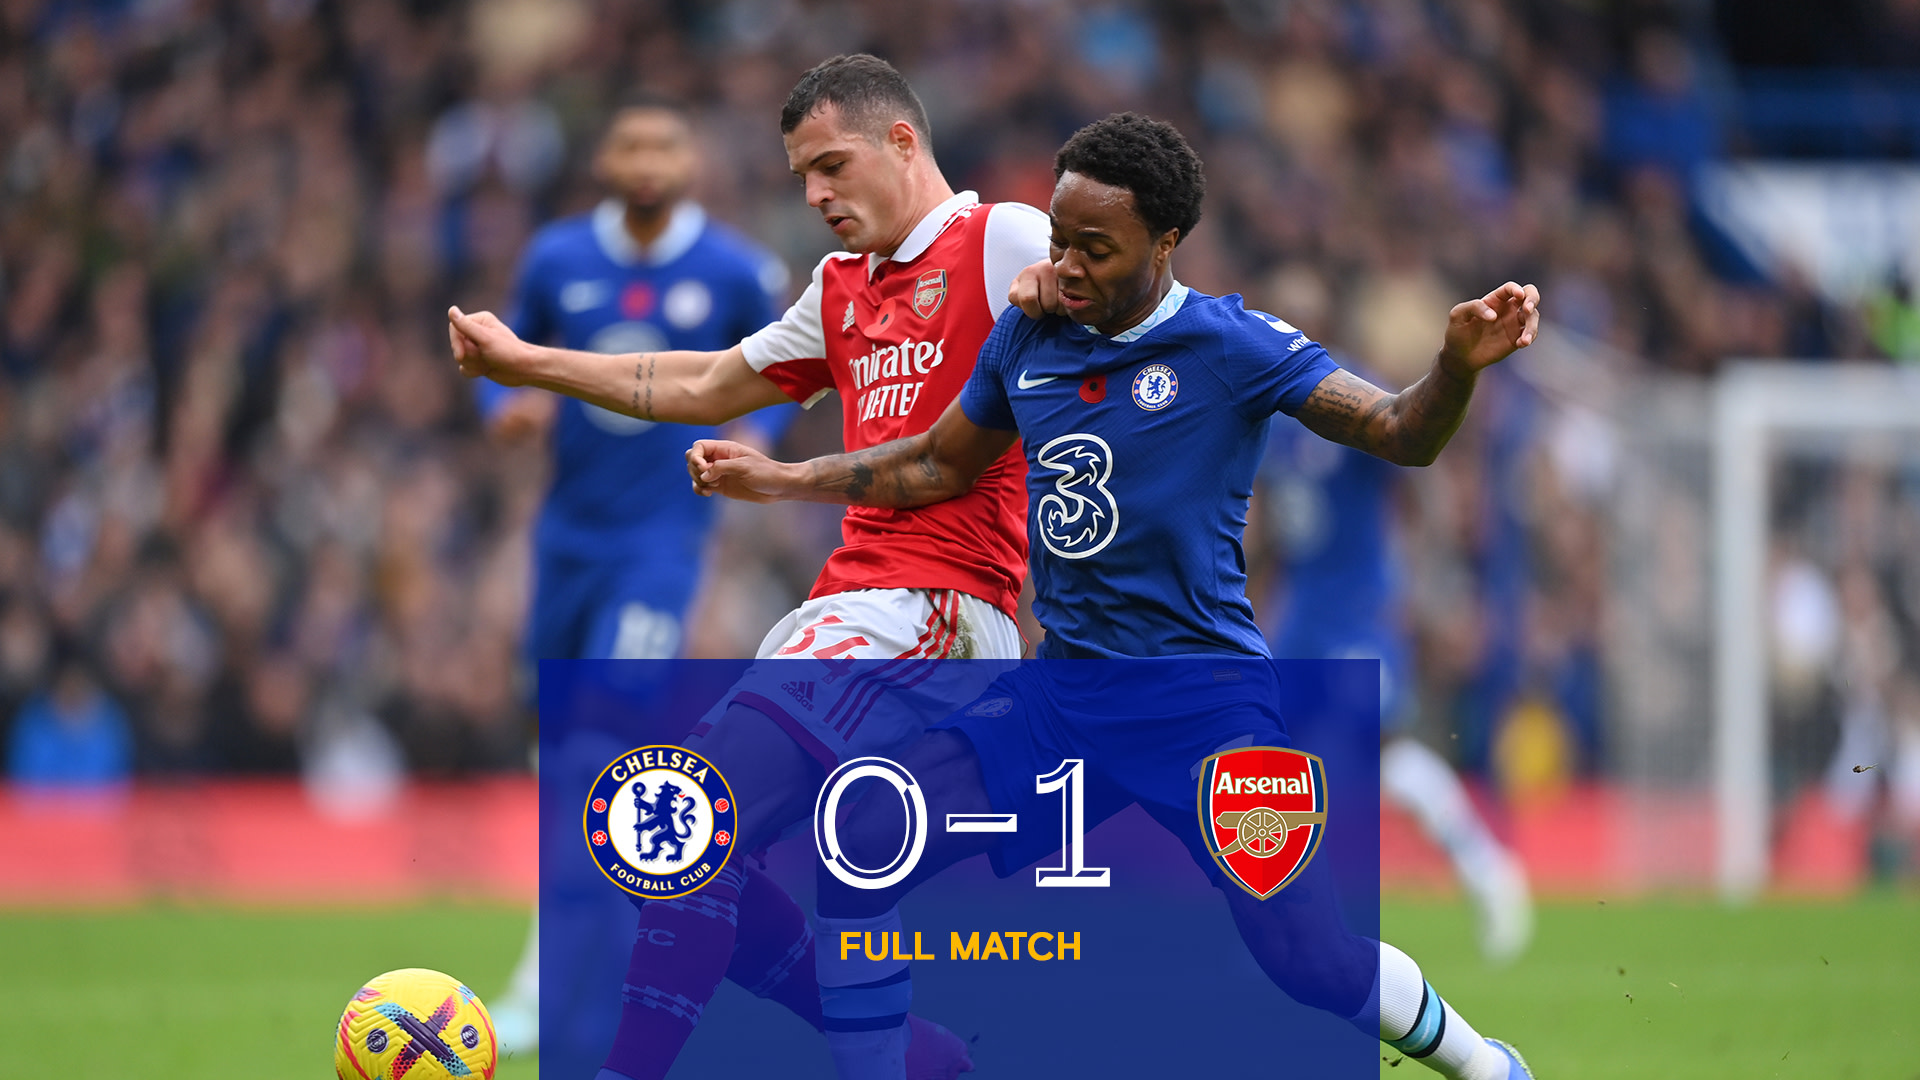 Chelsea 0-1 Arsenal Full Match Premier League Video Official Site Chelsea Football Club